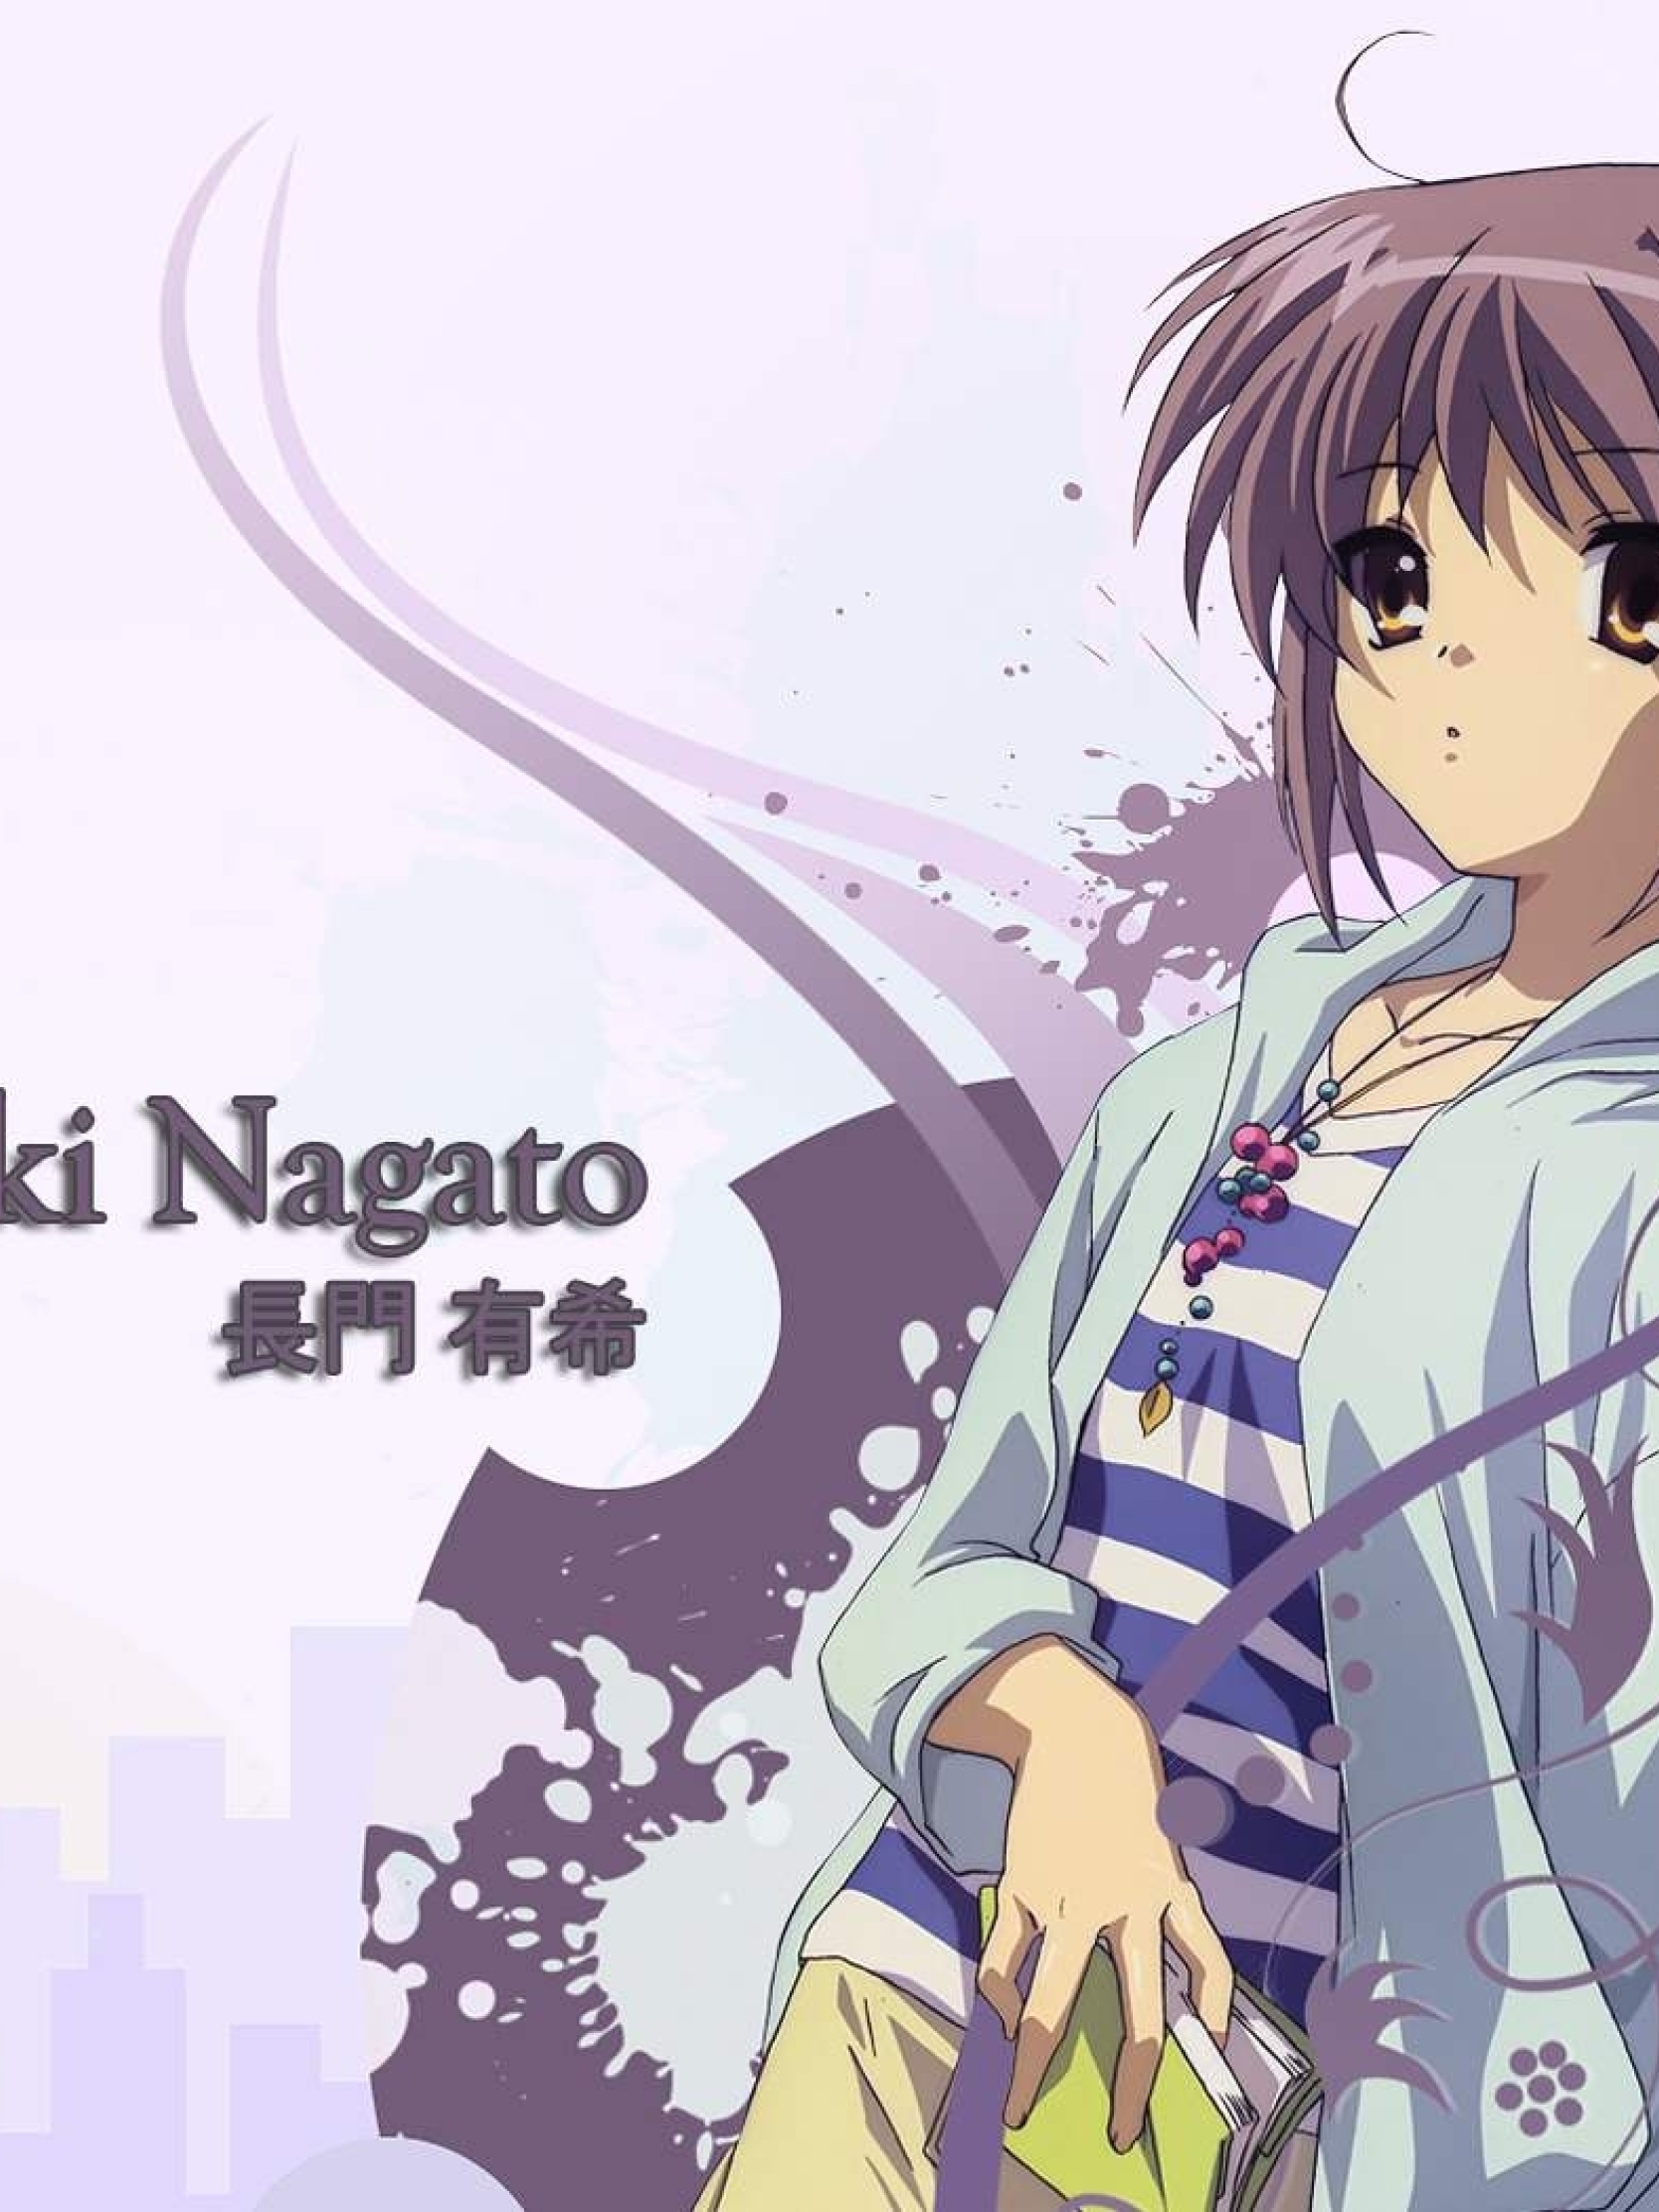 1668x2224 Yuki Nagato Girl Look 1668x2224 Resolution Wallpaper Hd Anime 4k Wallpapers Images Photos And Background Wallpapers Den